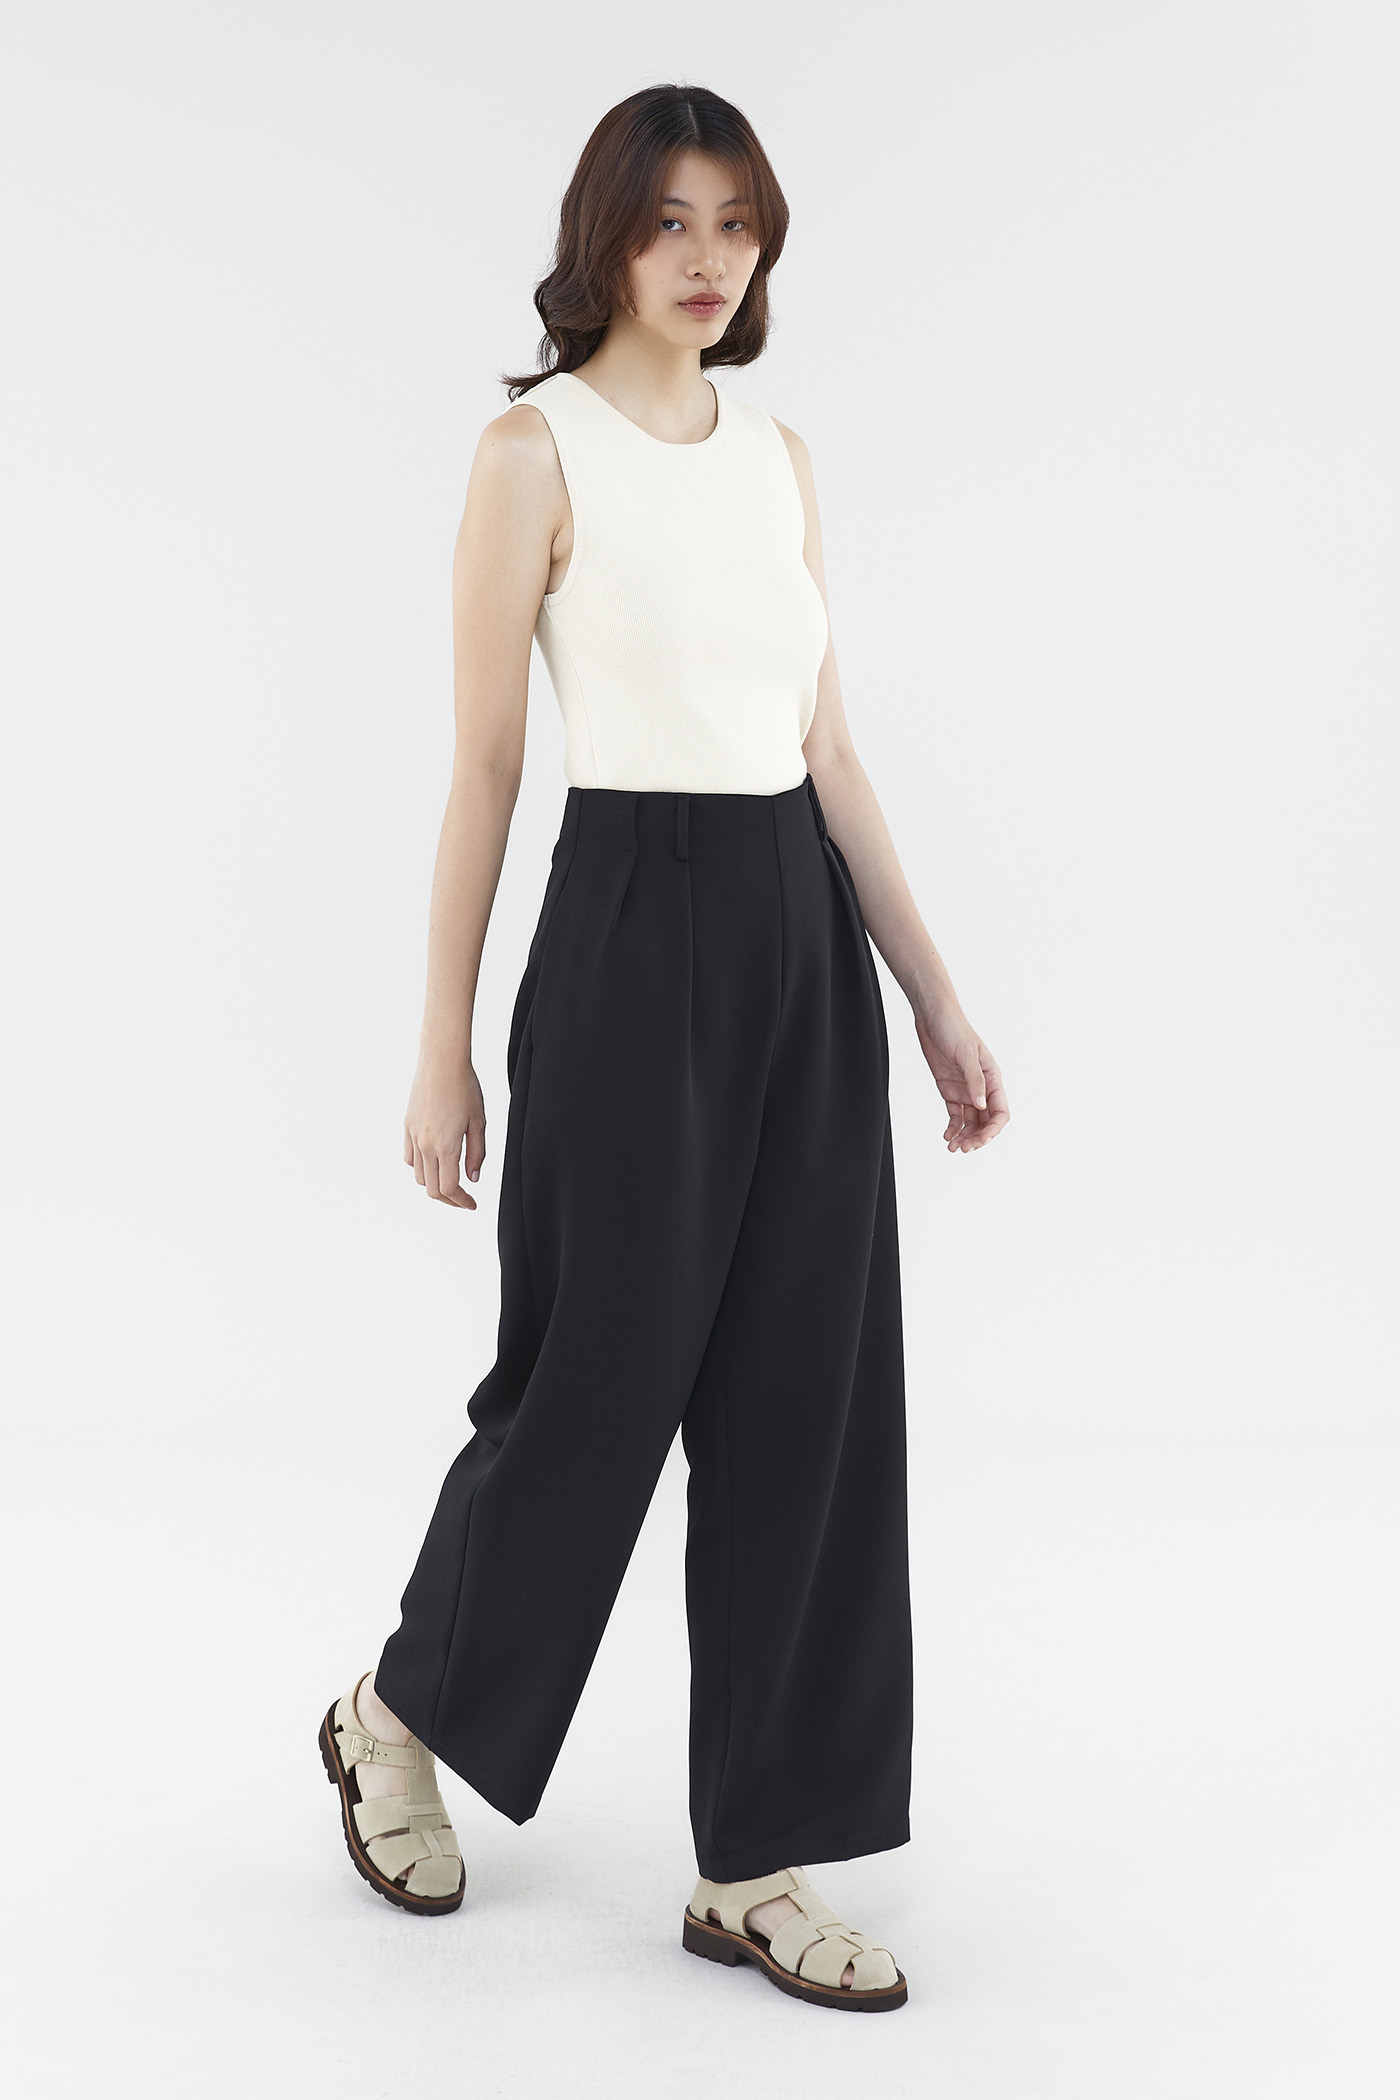 Linen Pants Outfits For Summer 2023 - Brit + Co